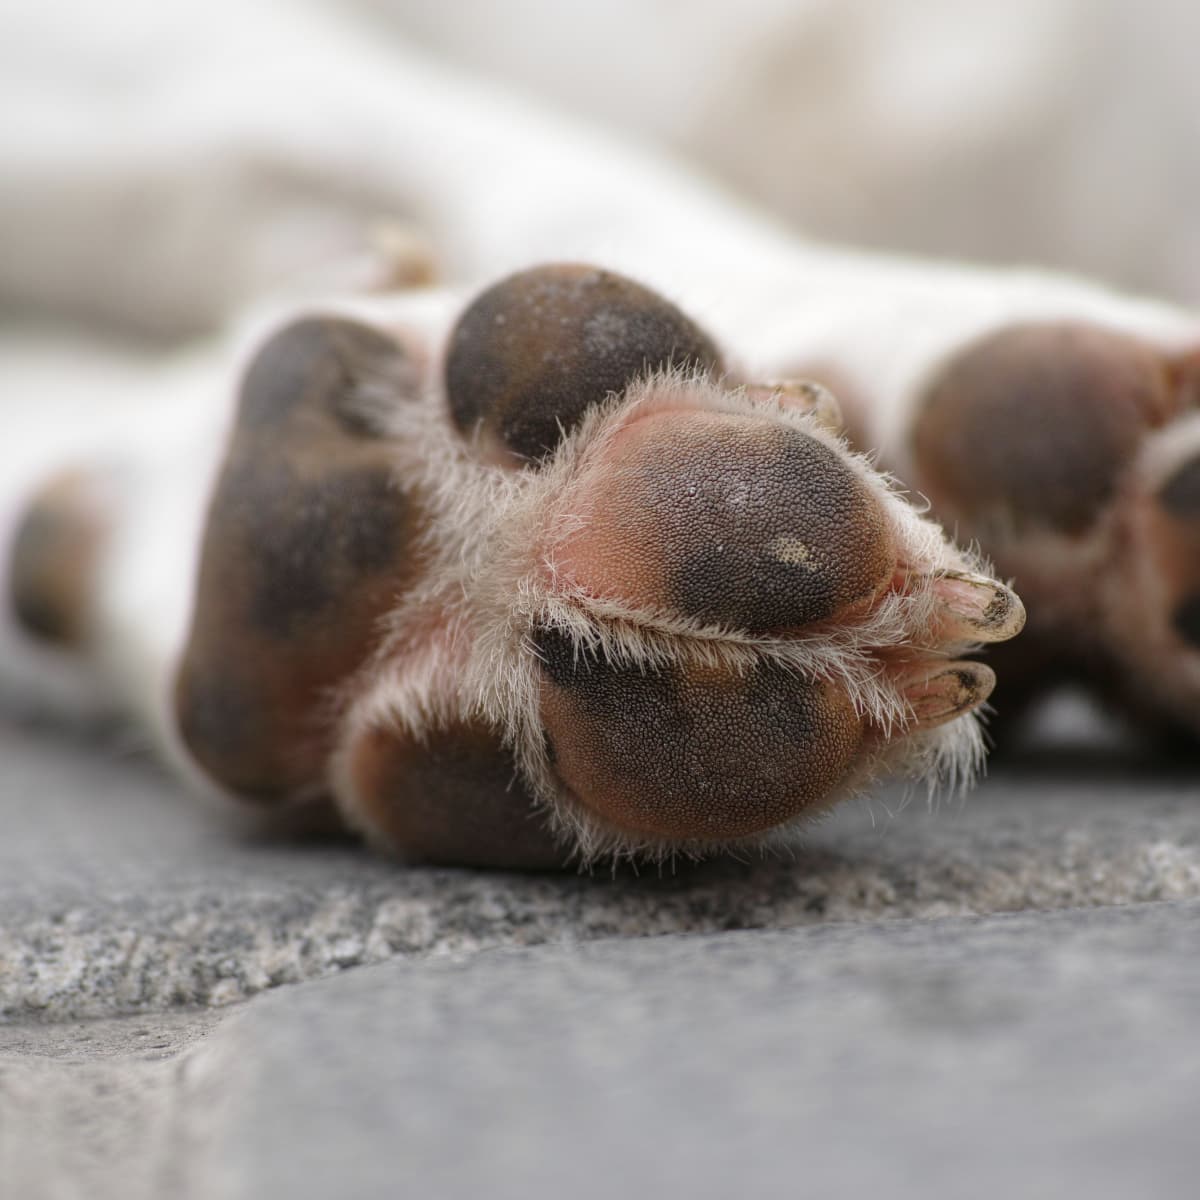 Cracked Dog Paws: Causes and Treatment